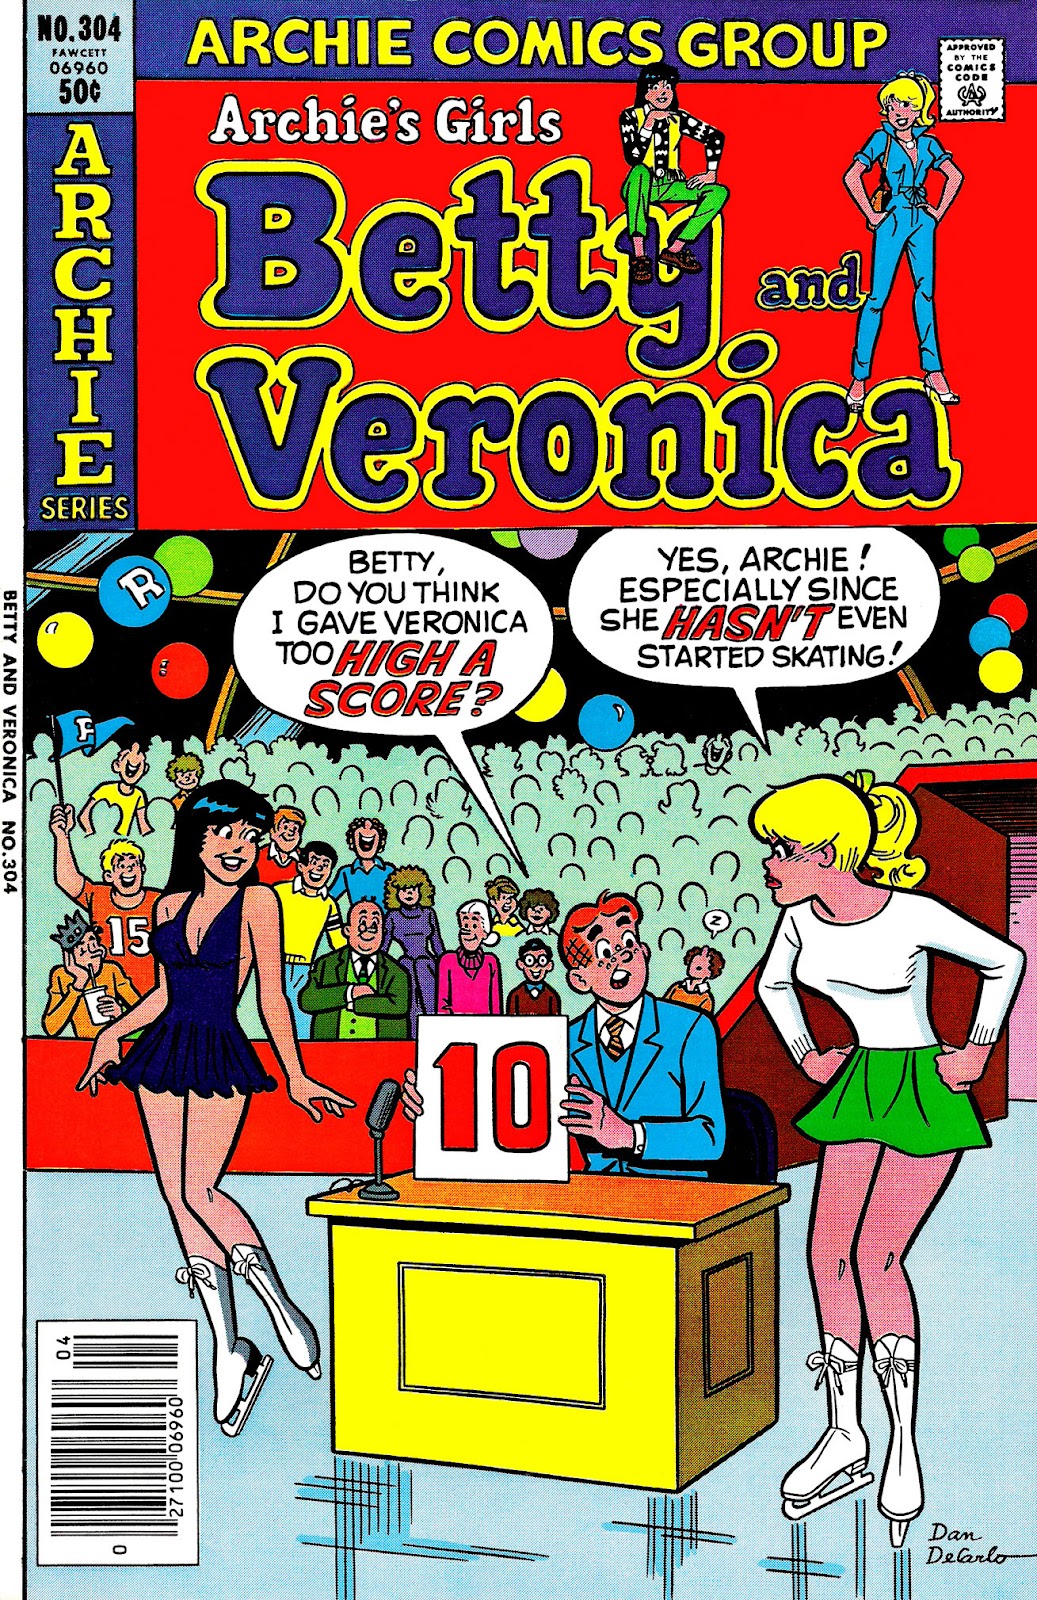 Archie's Girls Betty and Veronica 304 Page 1